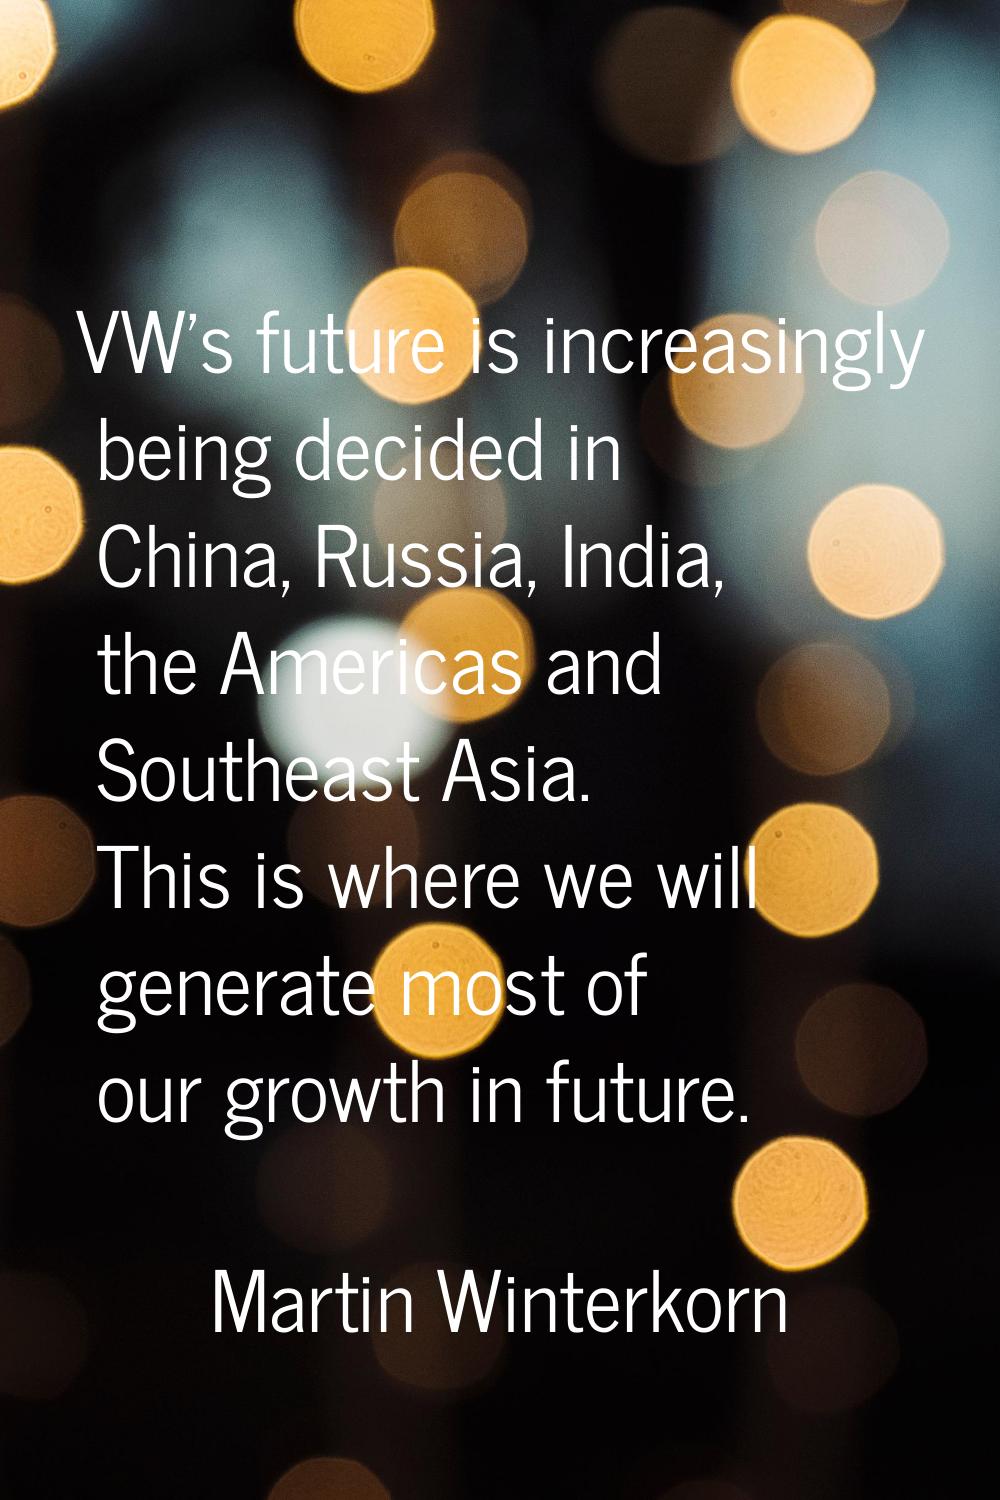 VW's future is increasingly being decided in China, Russia, India, the Americas and Southeast Asia.